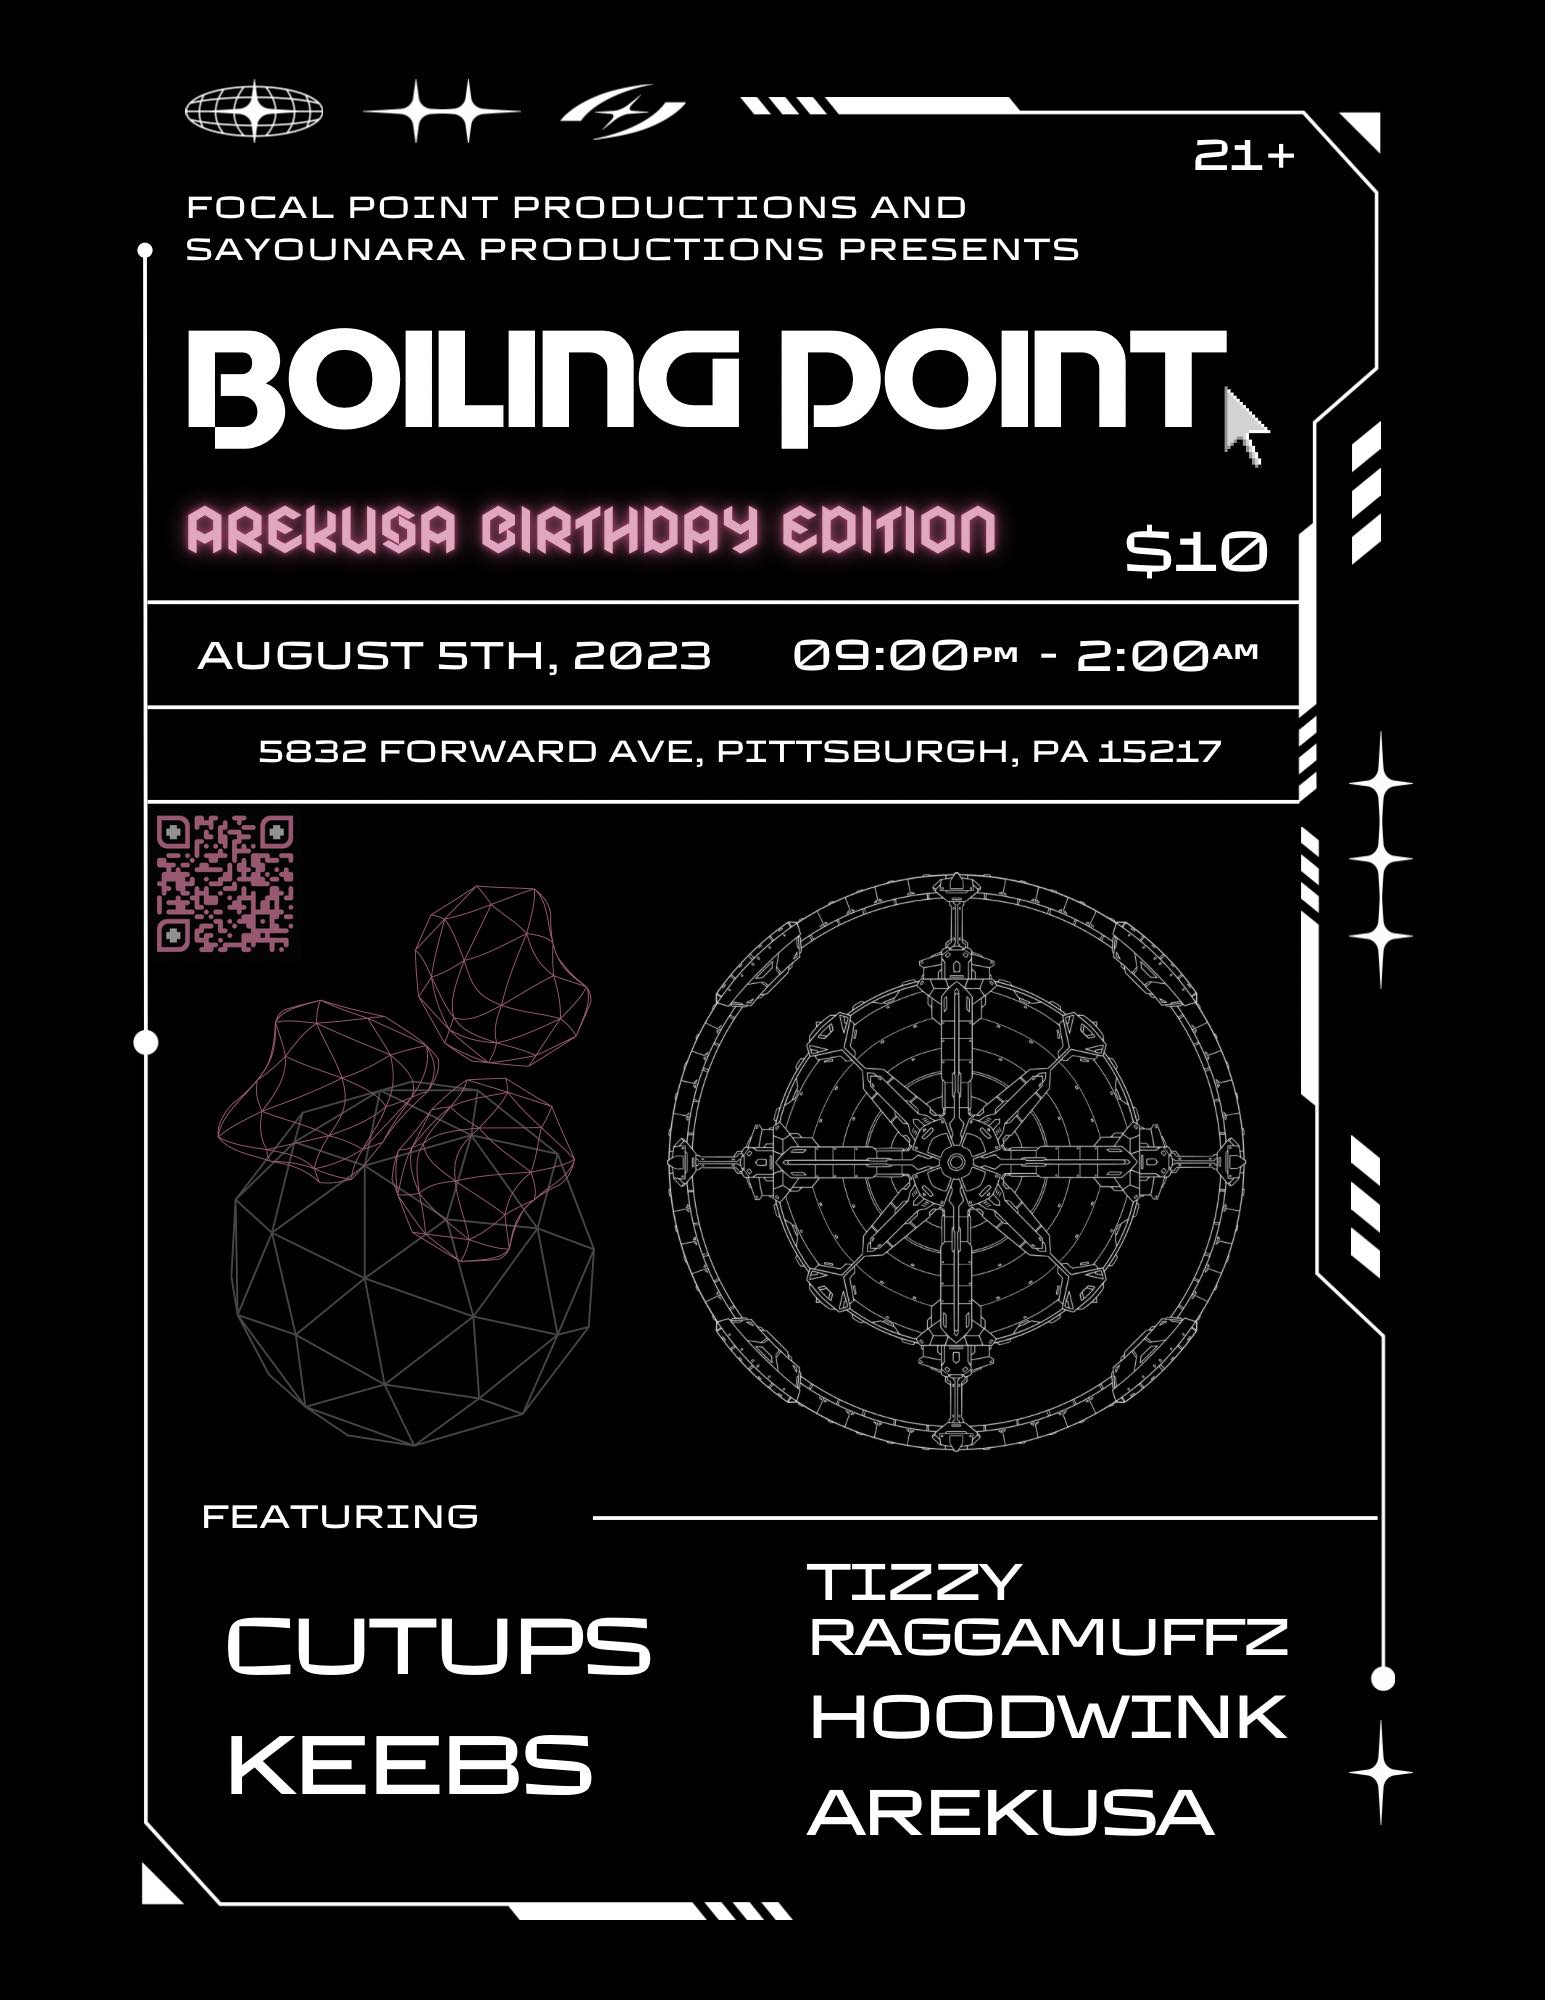 Sat Aug 5th BOILING POINT